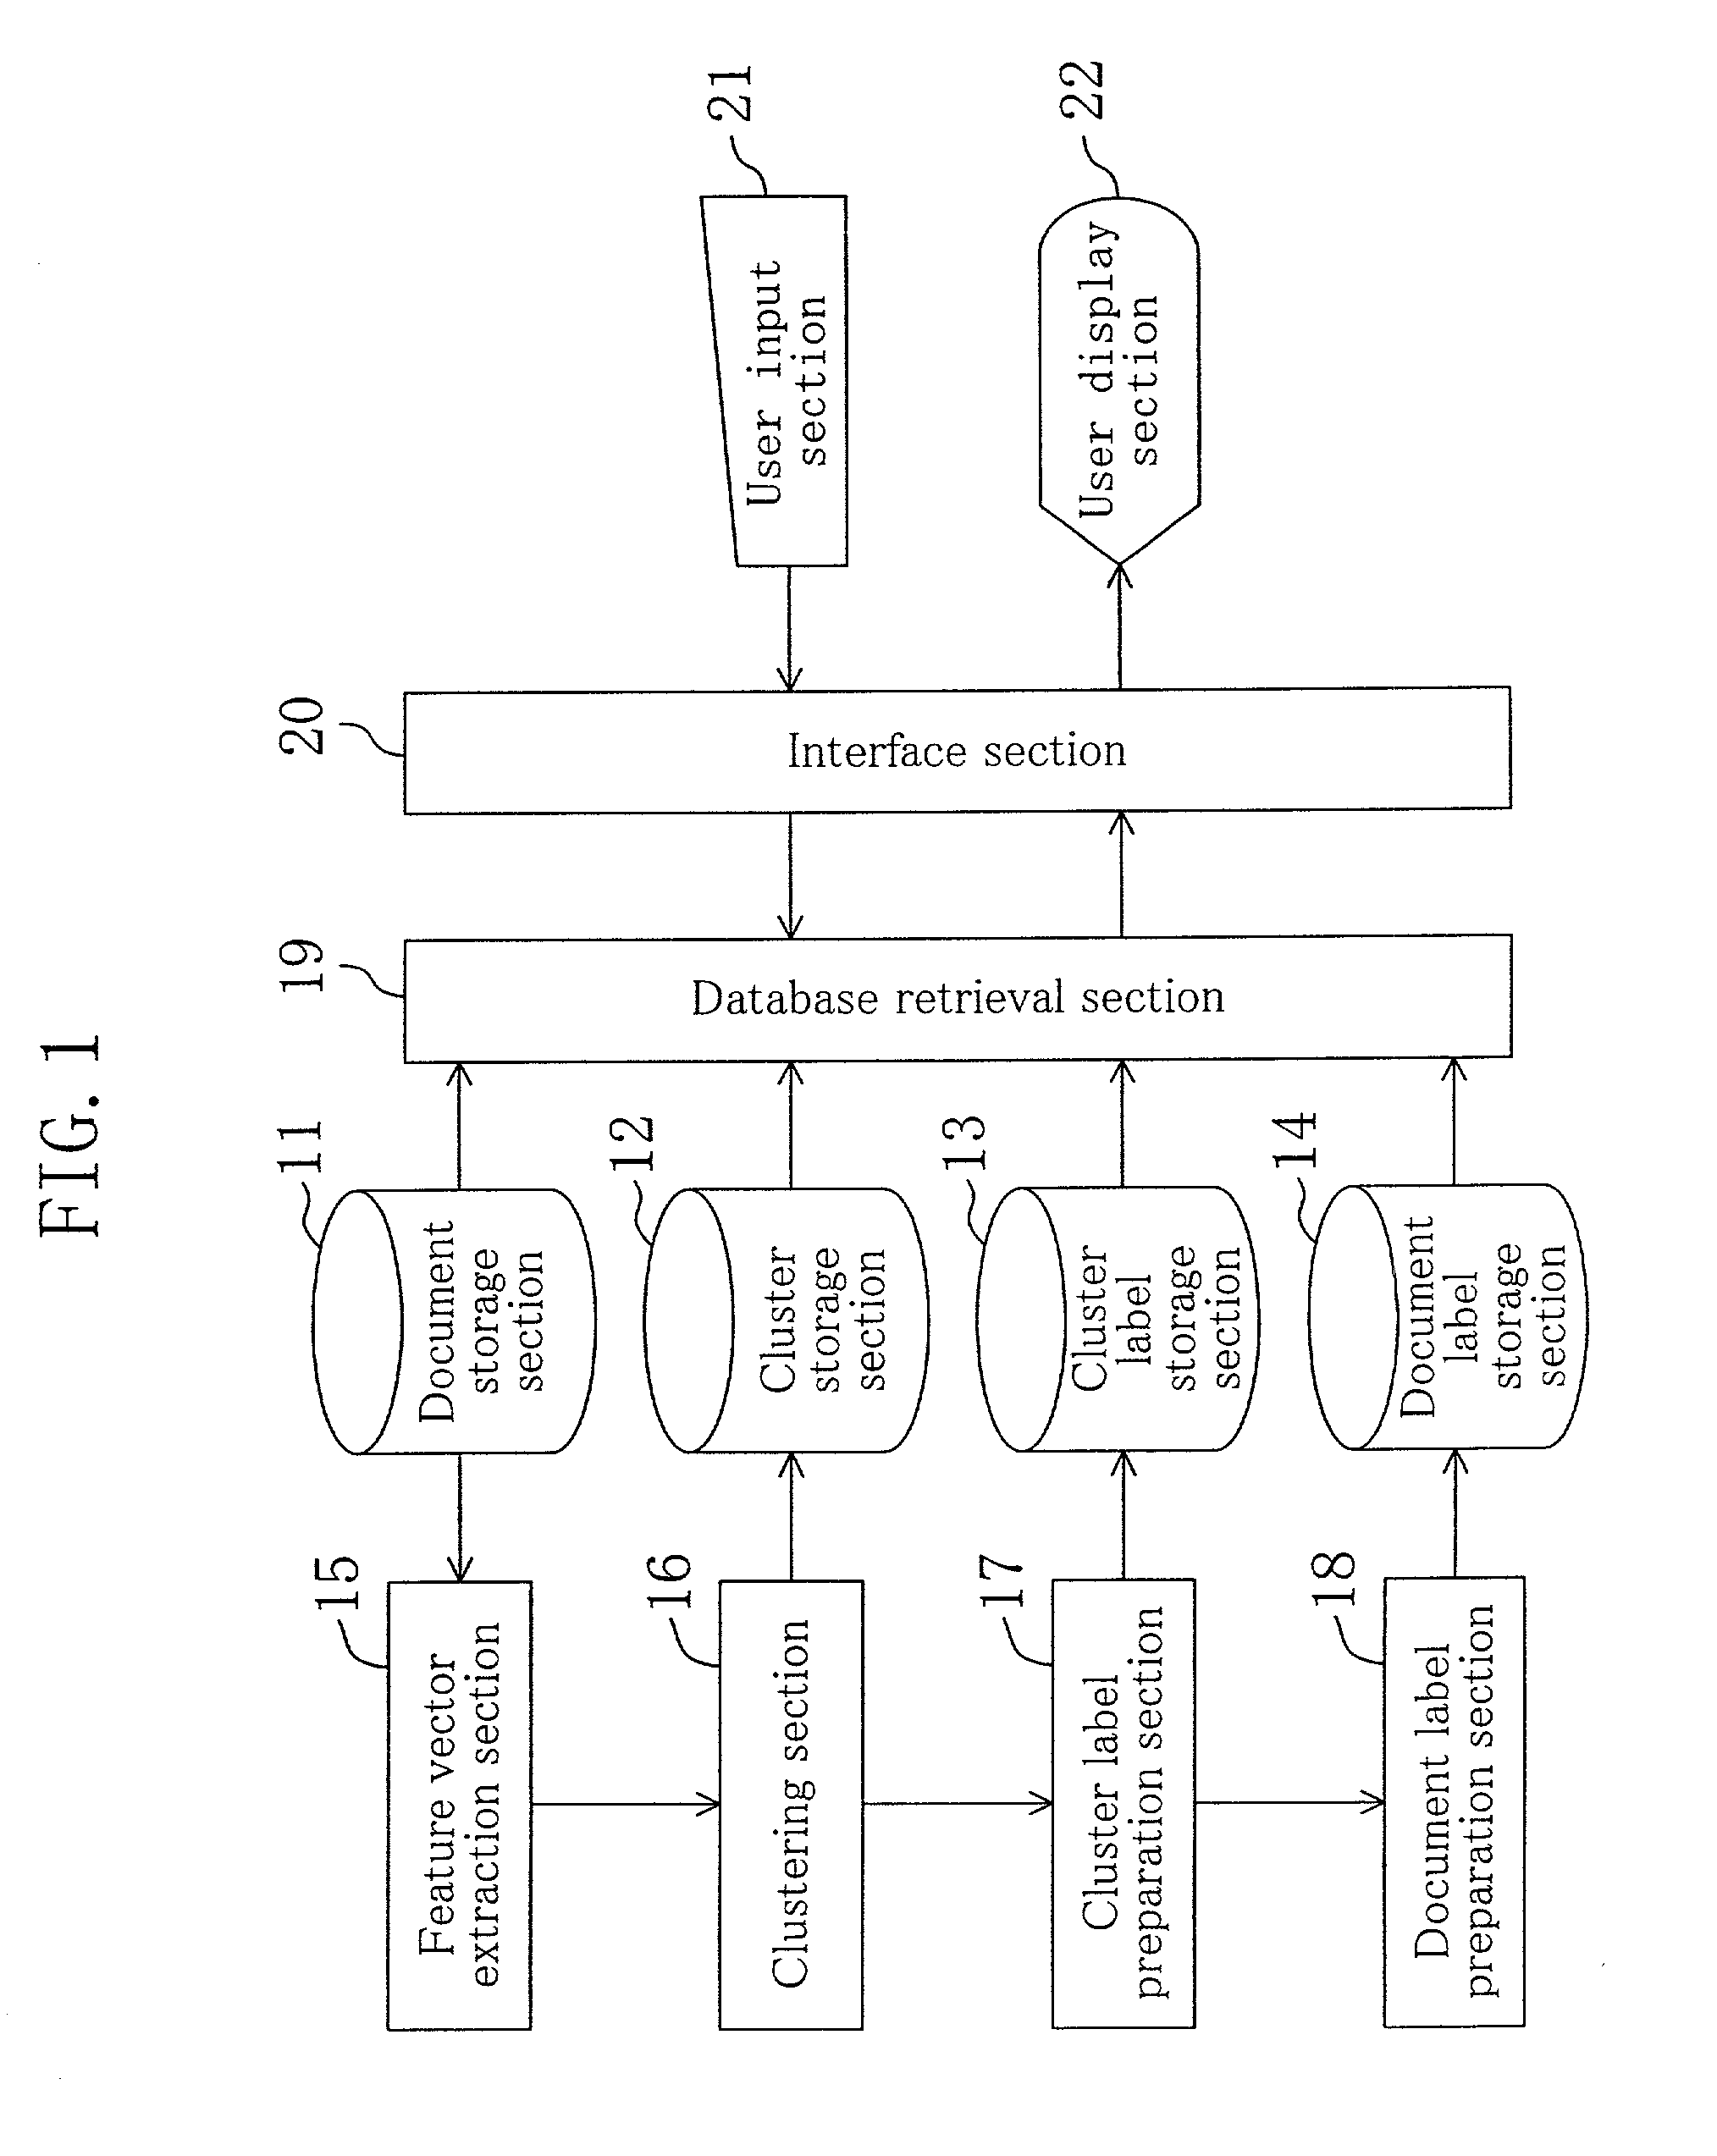 Information retrieval system for documents